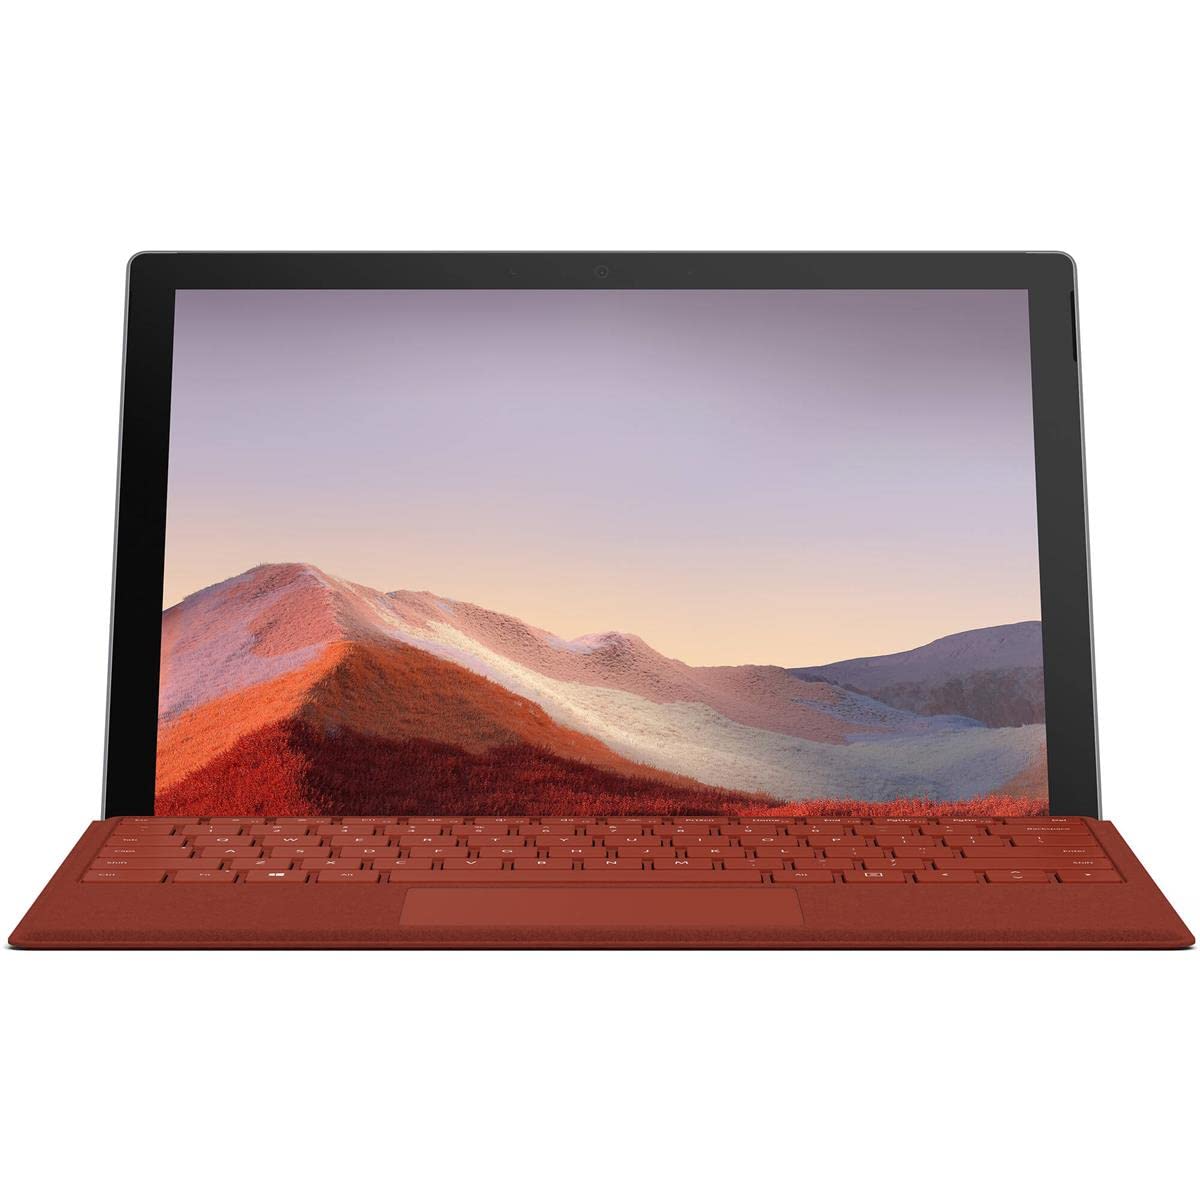 Microsoft Surface Pro 7 Tablet - 12.3